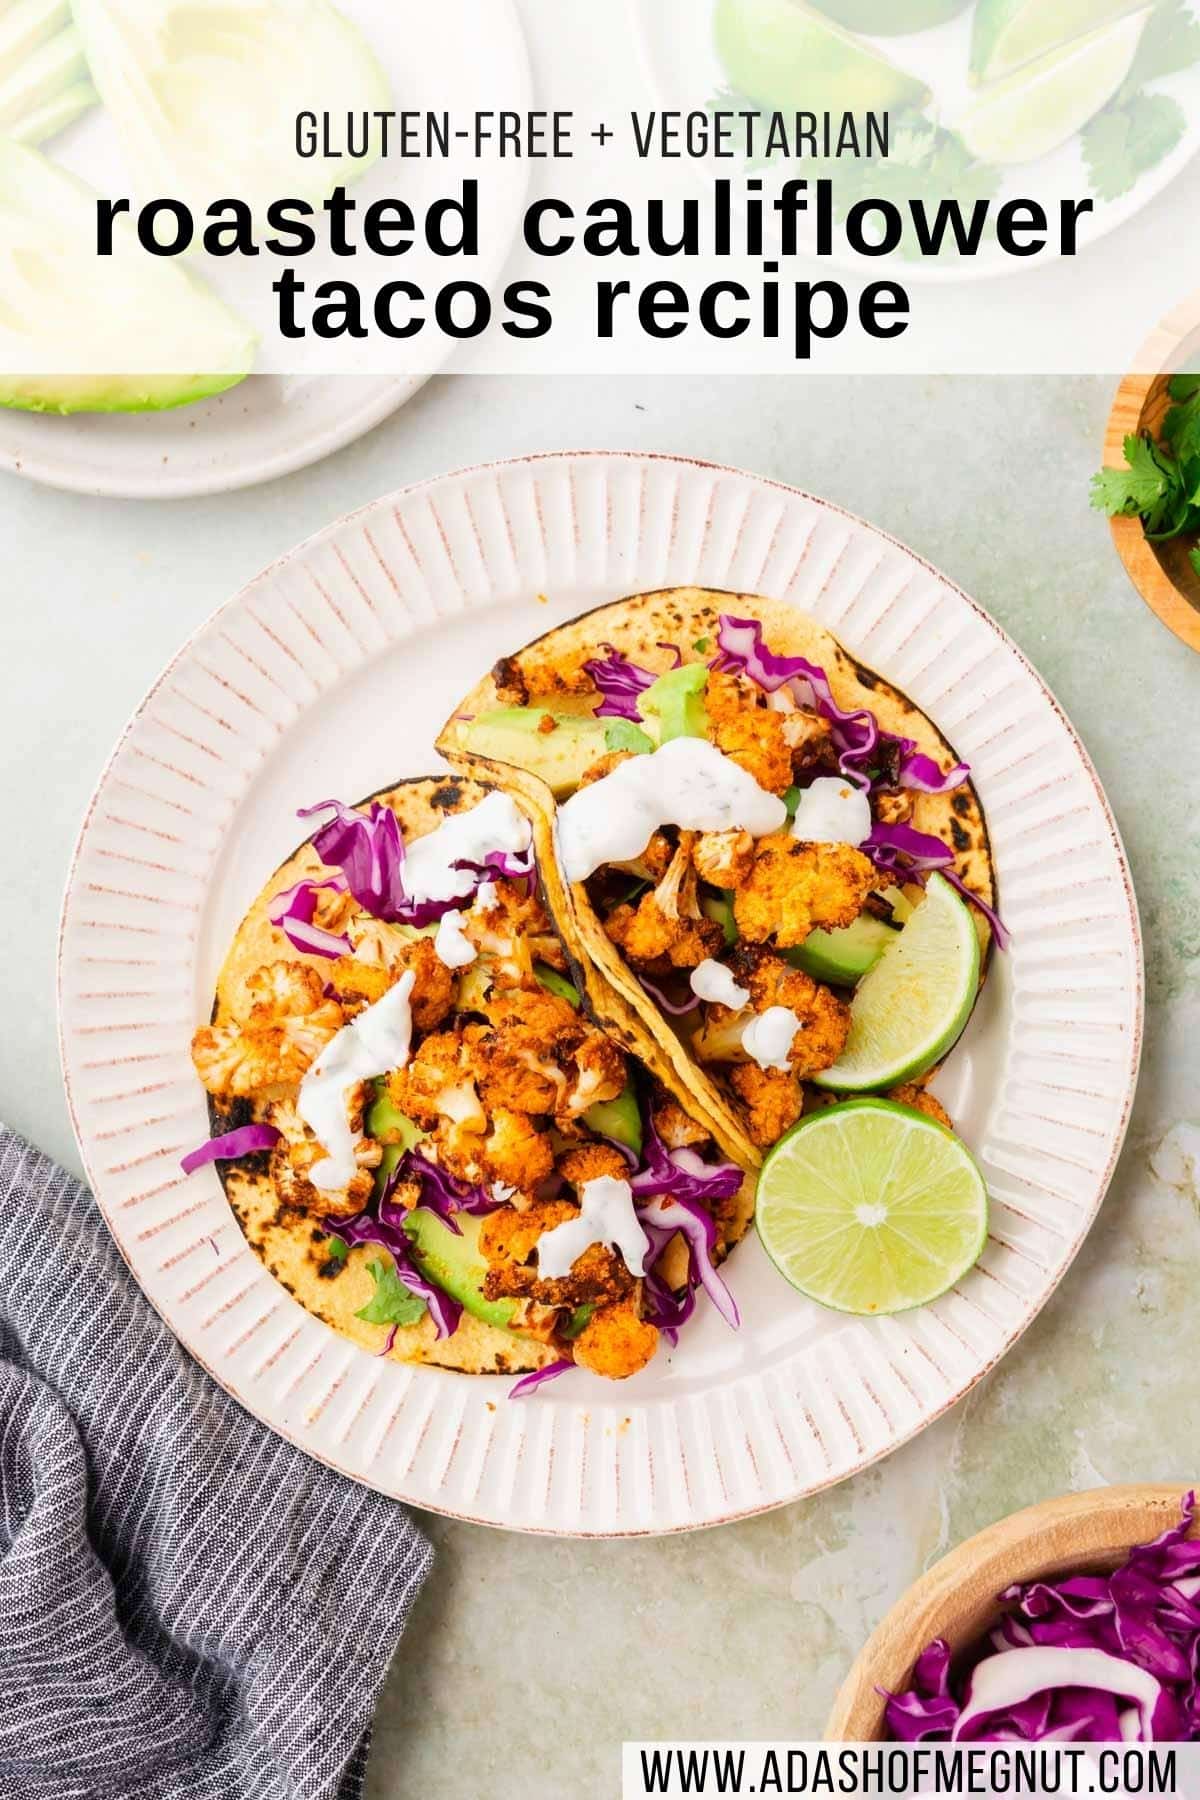 An overheard view of a plate of two cauliflower tacos topped with purple cabbage, lime wedges, avocado slices, and cilantro.